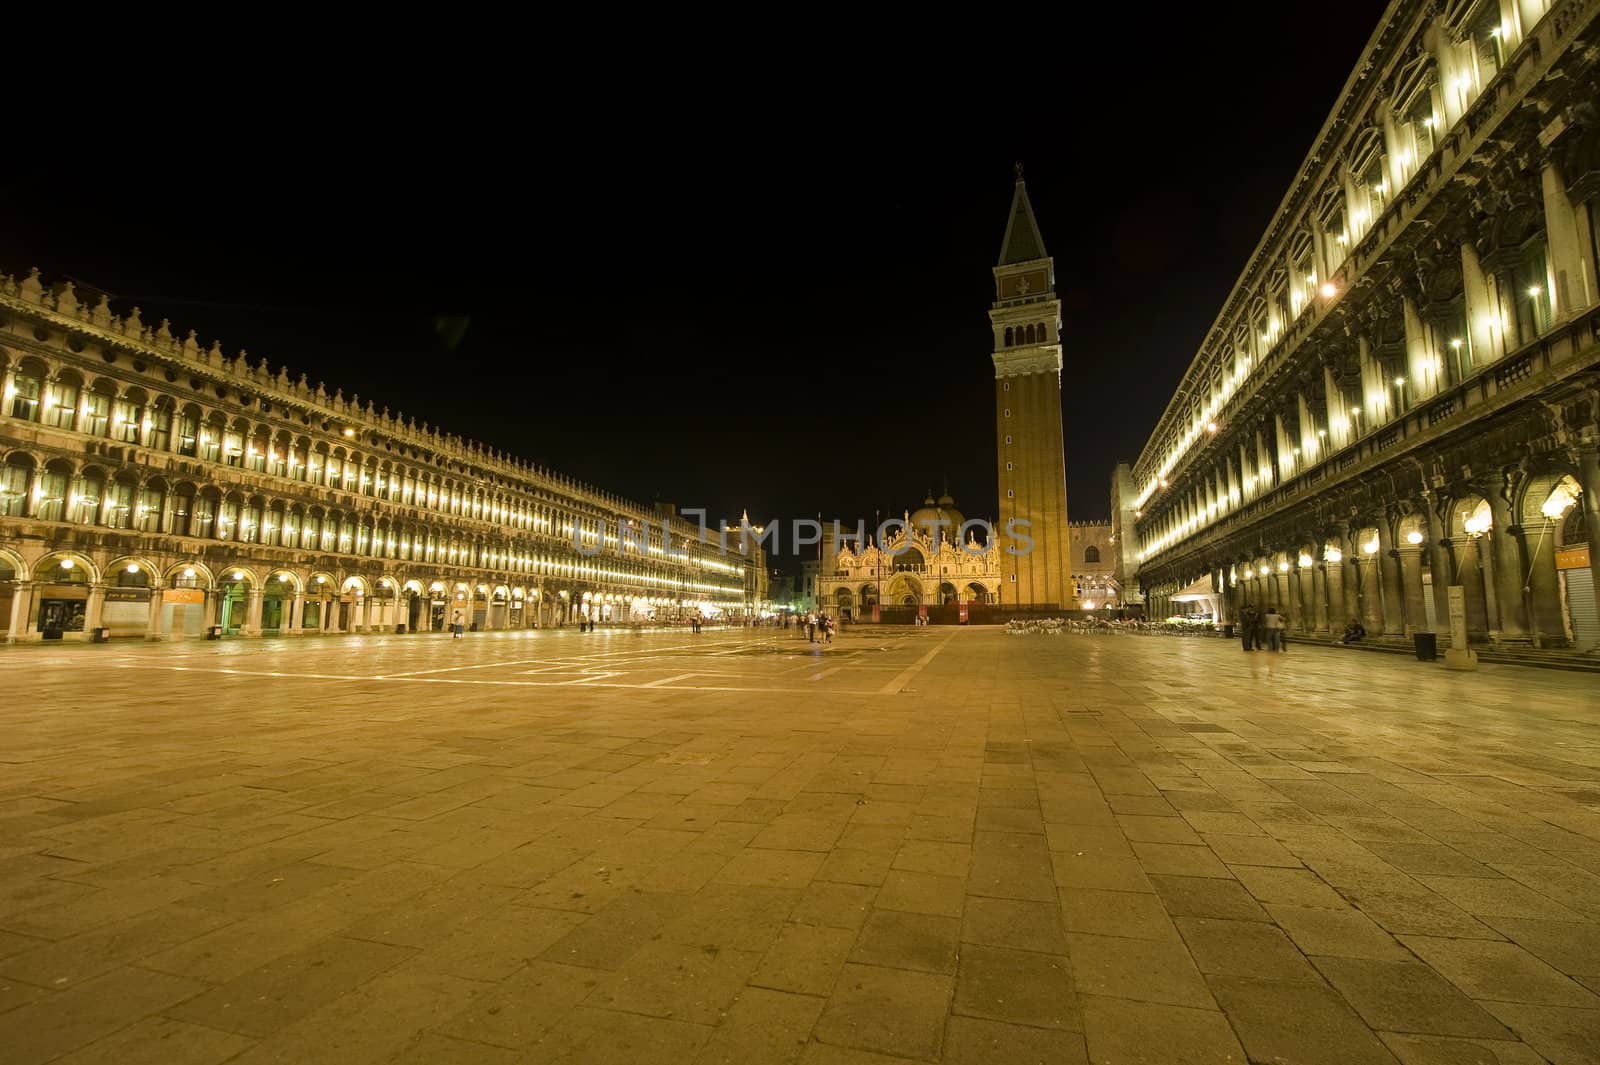 St. Marks square with the famous tower (campanlie). This square is usually the most crowded place in Venice and very rarely seen with out a mass of people. 